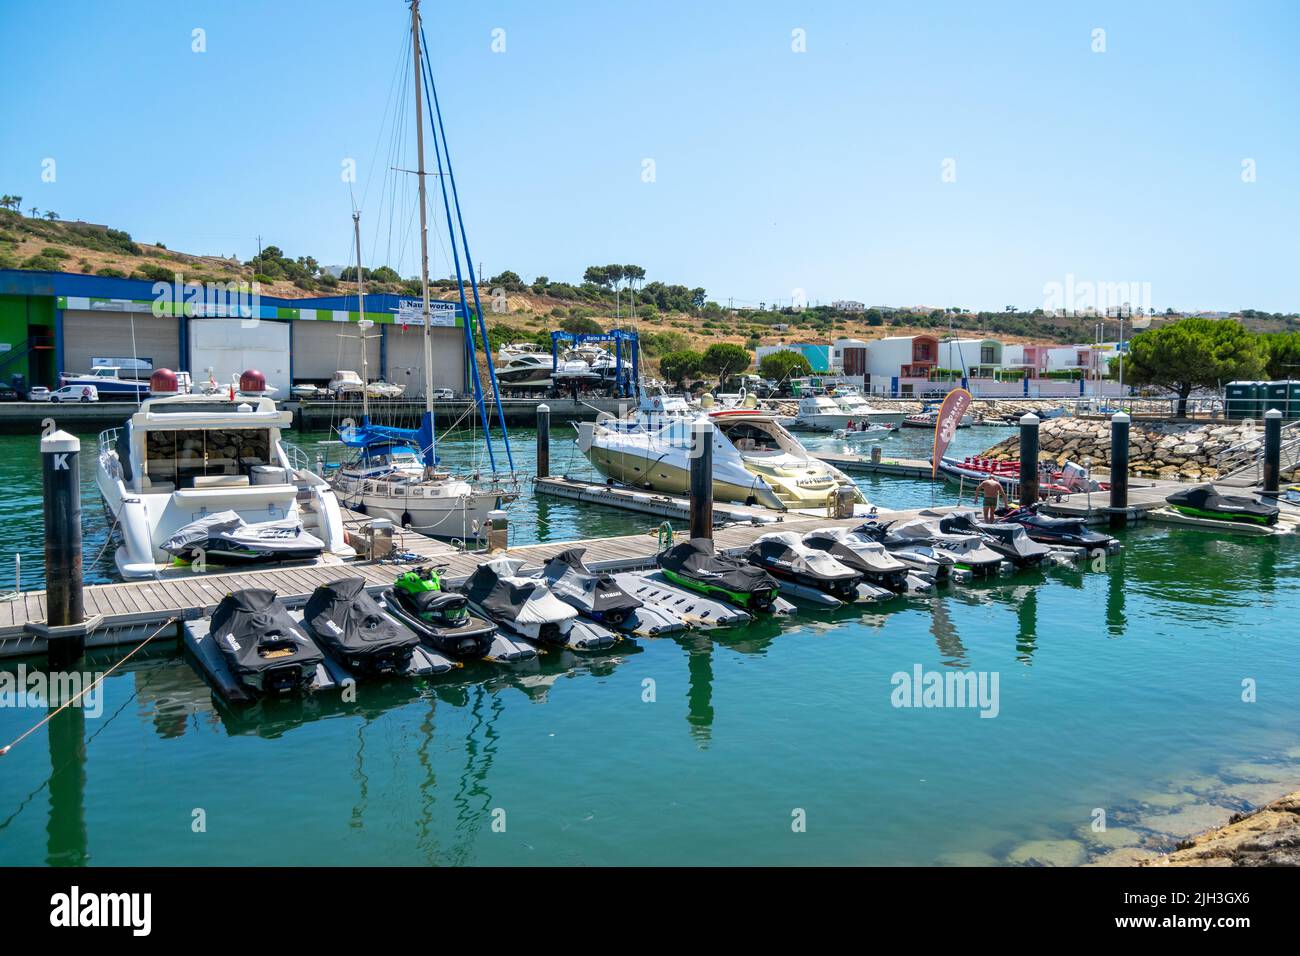 Marina de Albufeira, Algarve, Portugal. Water jets parked near boats. Summer time, Europe and traveling destinations. Stock Photo